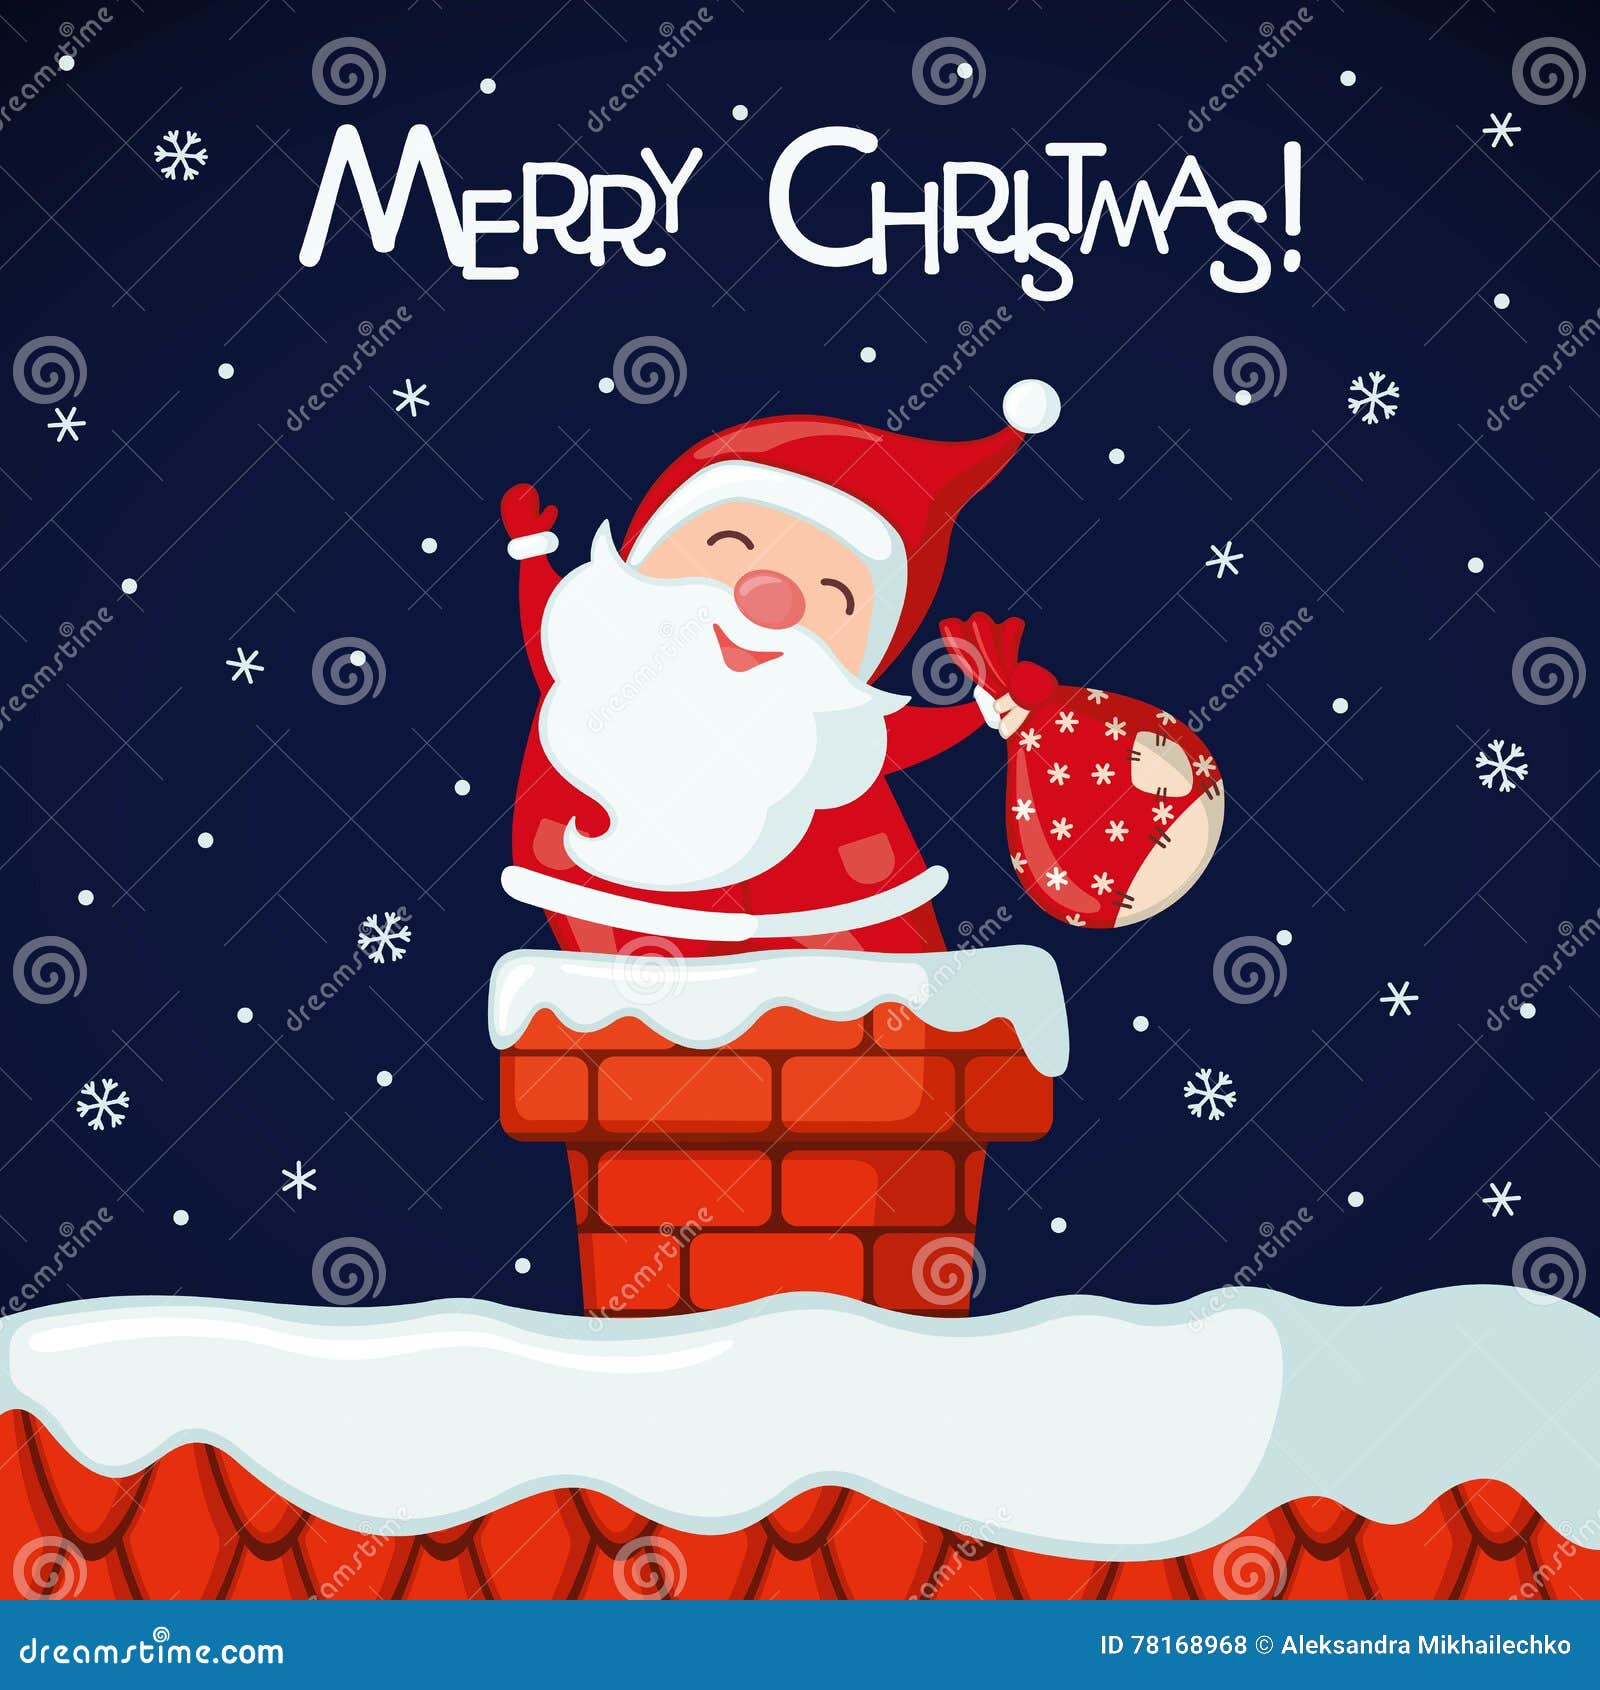 Christmas Card with Funny Santa Claus in Chimney. Stock Vector ...